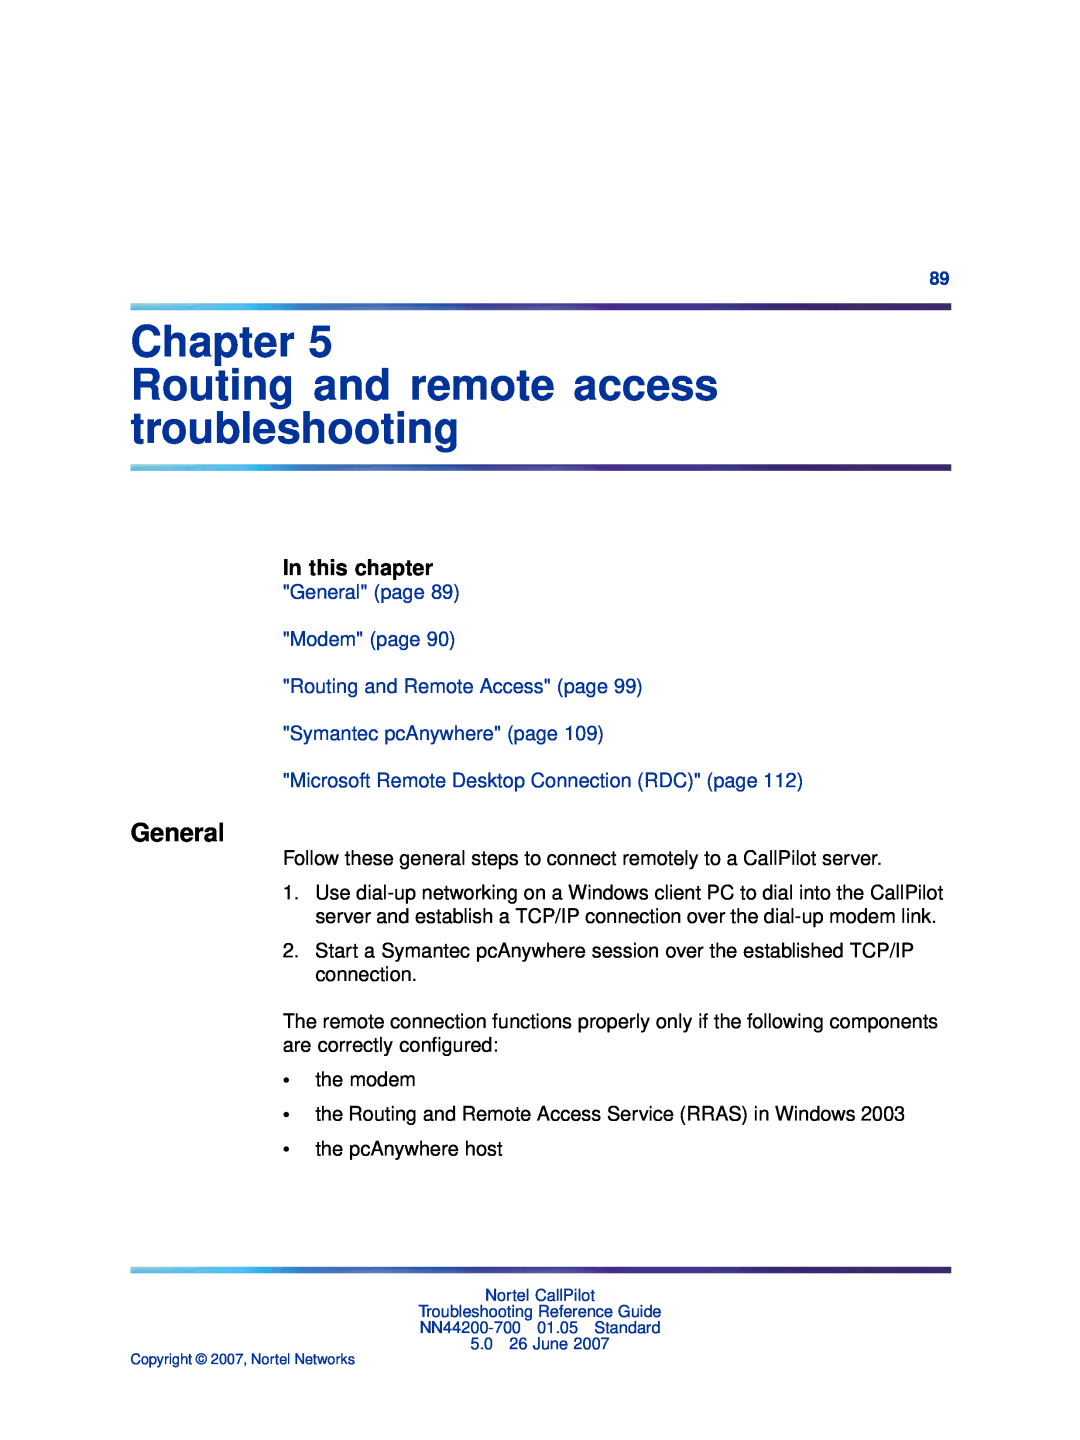 Nortel Networks NN44200-700 manual Chapter Routing and remote access troubleshooting, General, In this chapter 